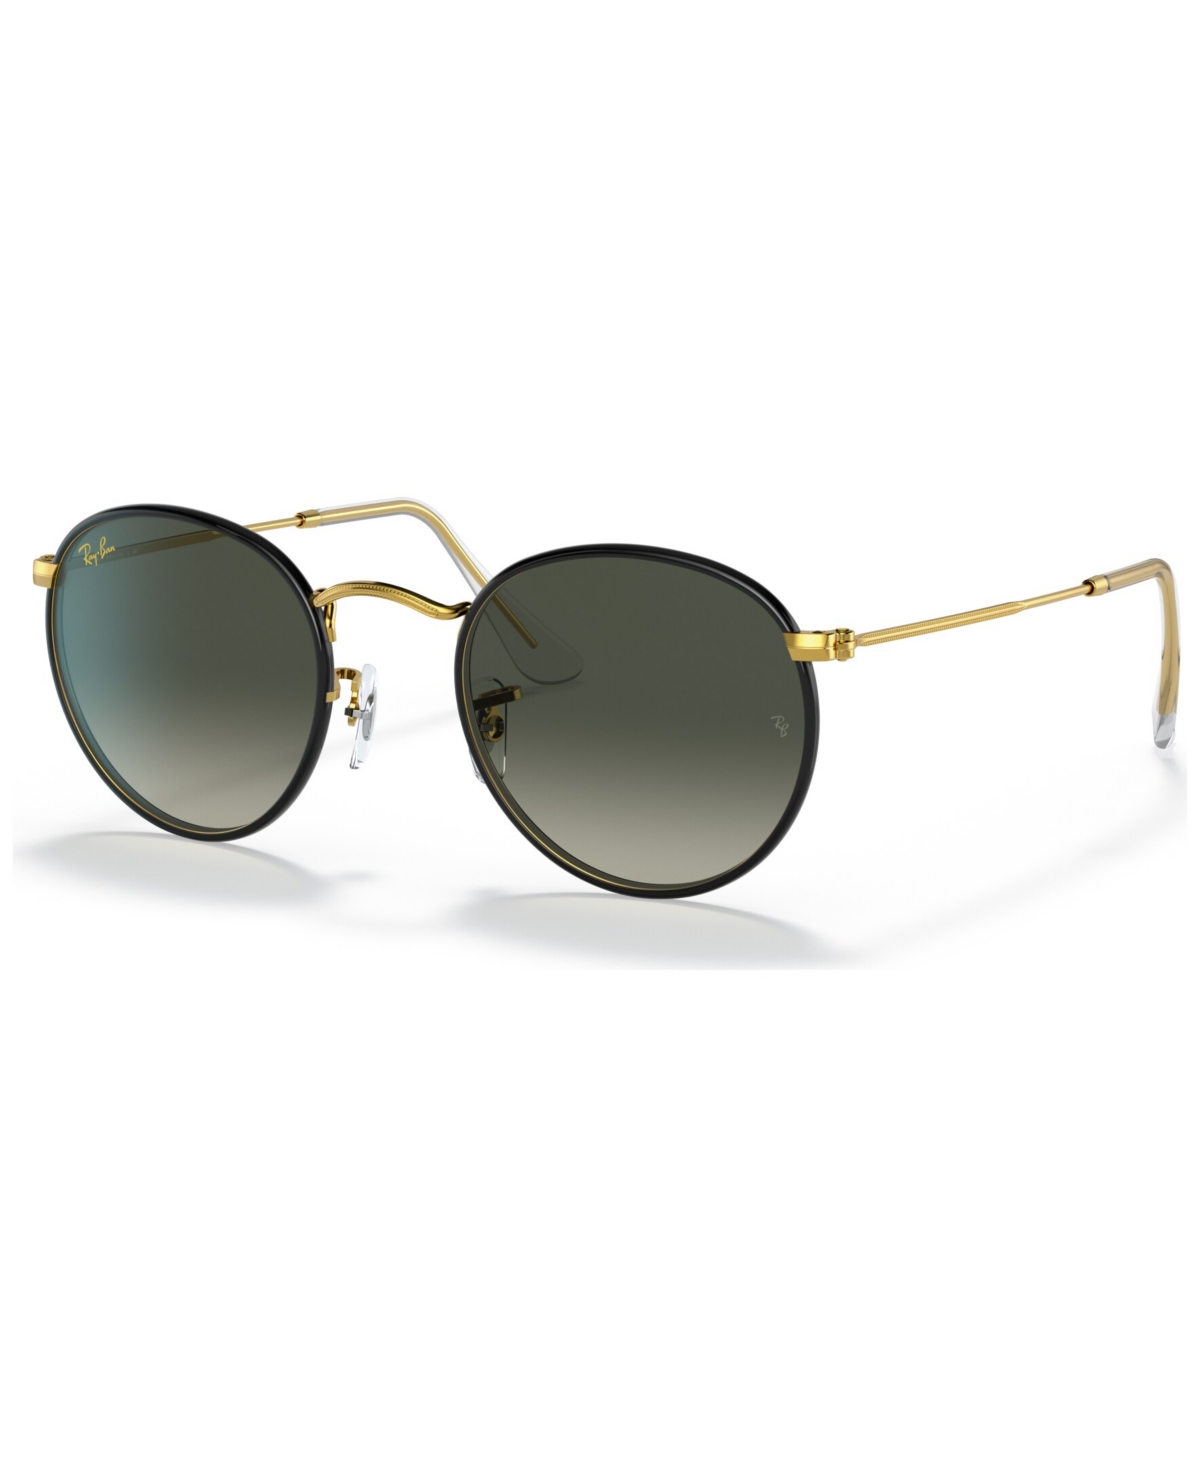 Ray Ban Rb3447jm Sunglasses In Gold